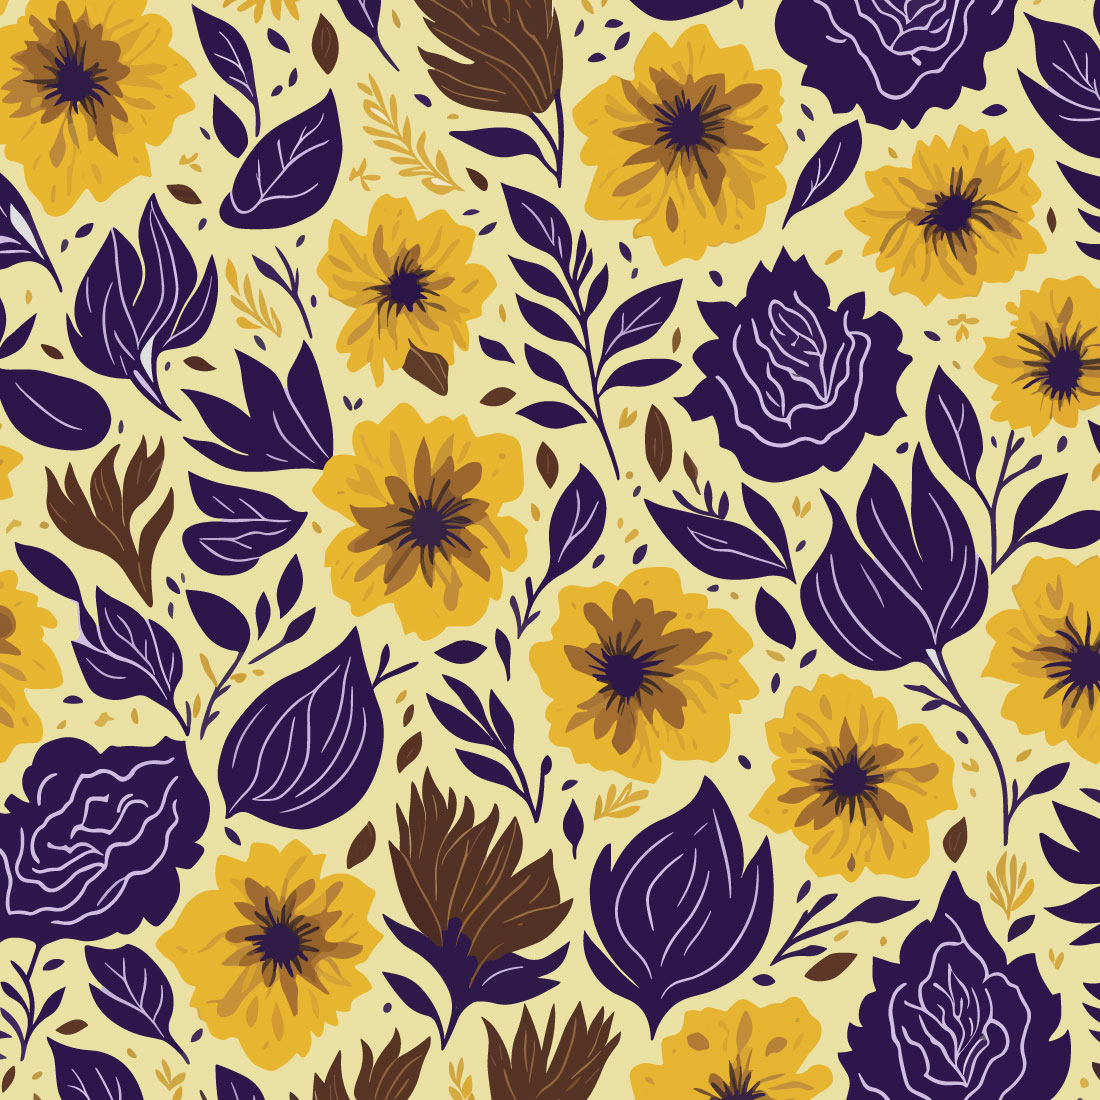 3 sets of flower pattern designs preview image.